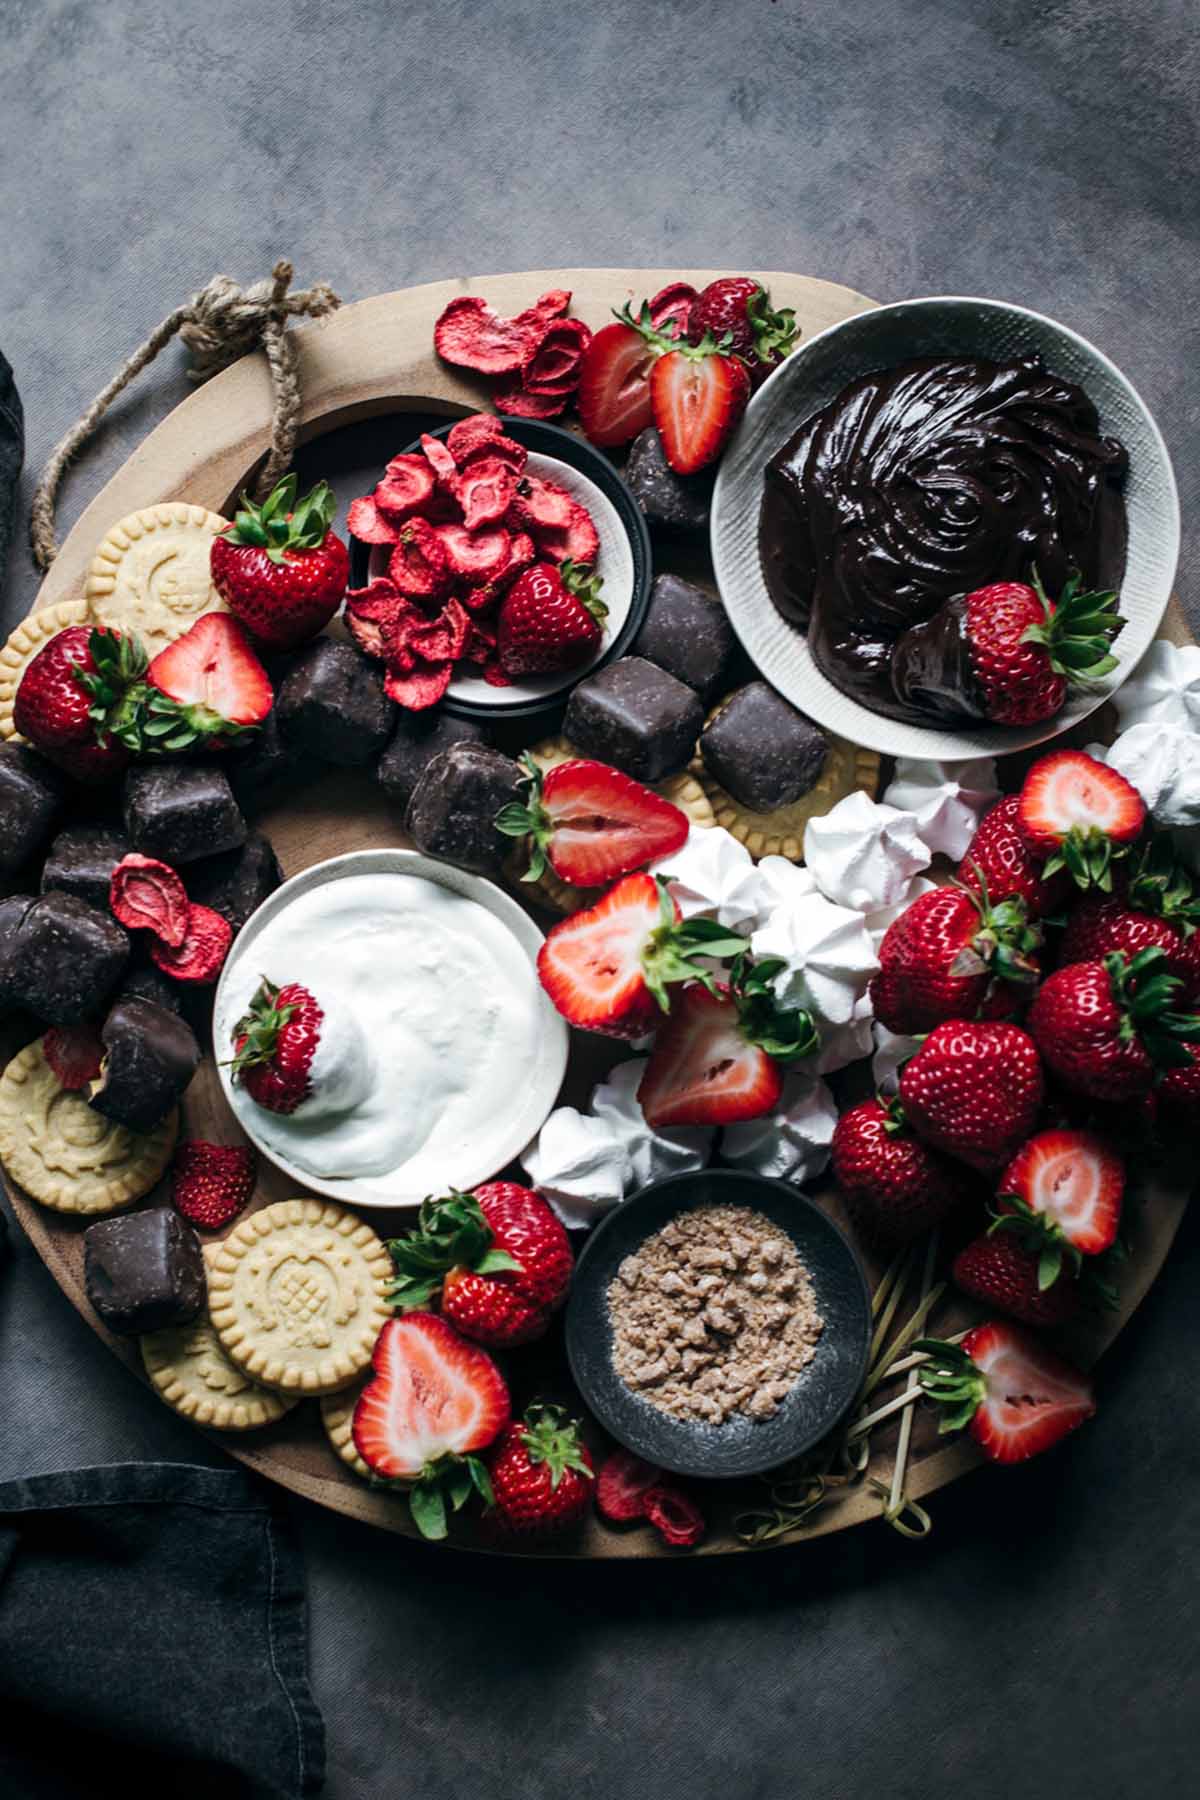 wooden cutting board layered with strawberries, chocolate, and cream.